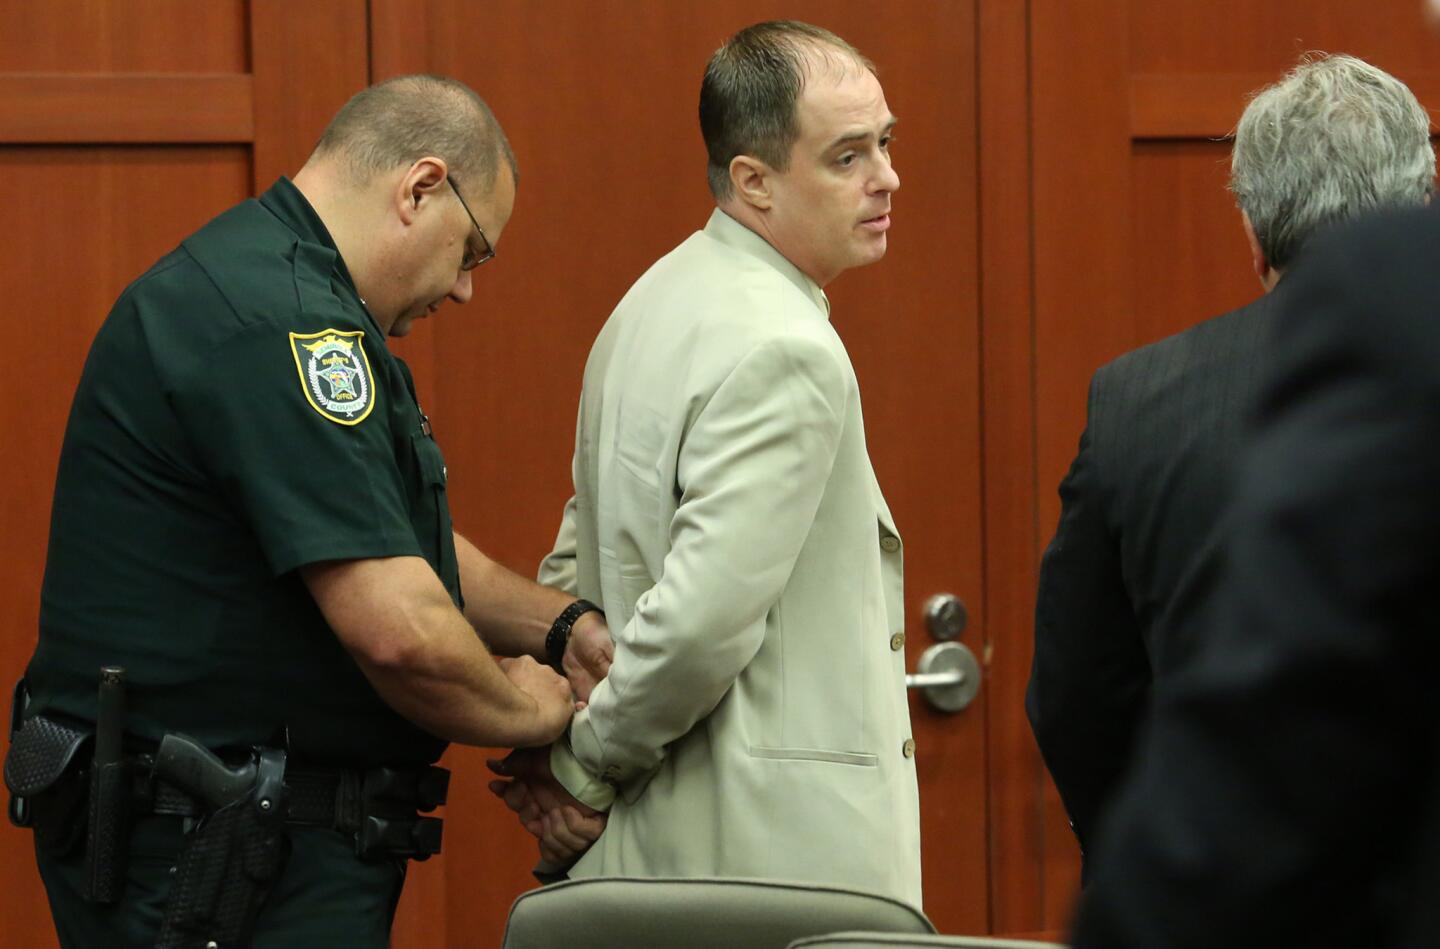 Matthew Apperson, center, confers with his attorney Michael LaFay,right, as he is handcuffed by a Seminole County Deputy Sheriff after Circuit Judge Debra S. Nelson ruled that because Apperson was charged with committing a new crime while free on bond Ð urinating on his neighbor's front door - he should be jailed. Apperson is the former mental patient who allegedly shot at Zimmerman in May in a road-rage incident at Lake Mary, Florida (Red Huber/Staff Photographer)